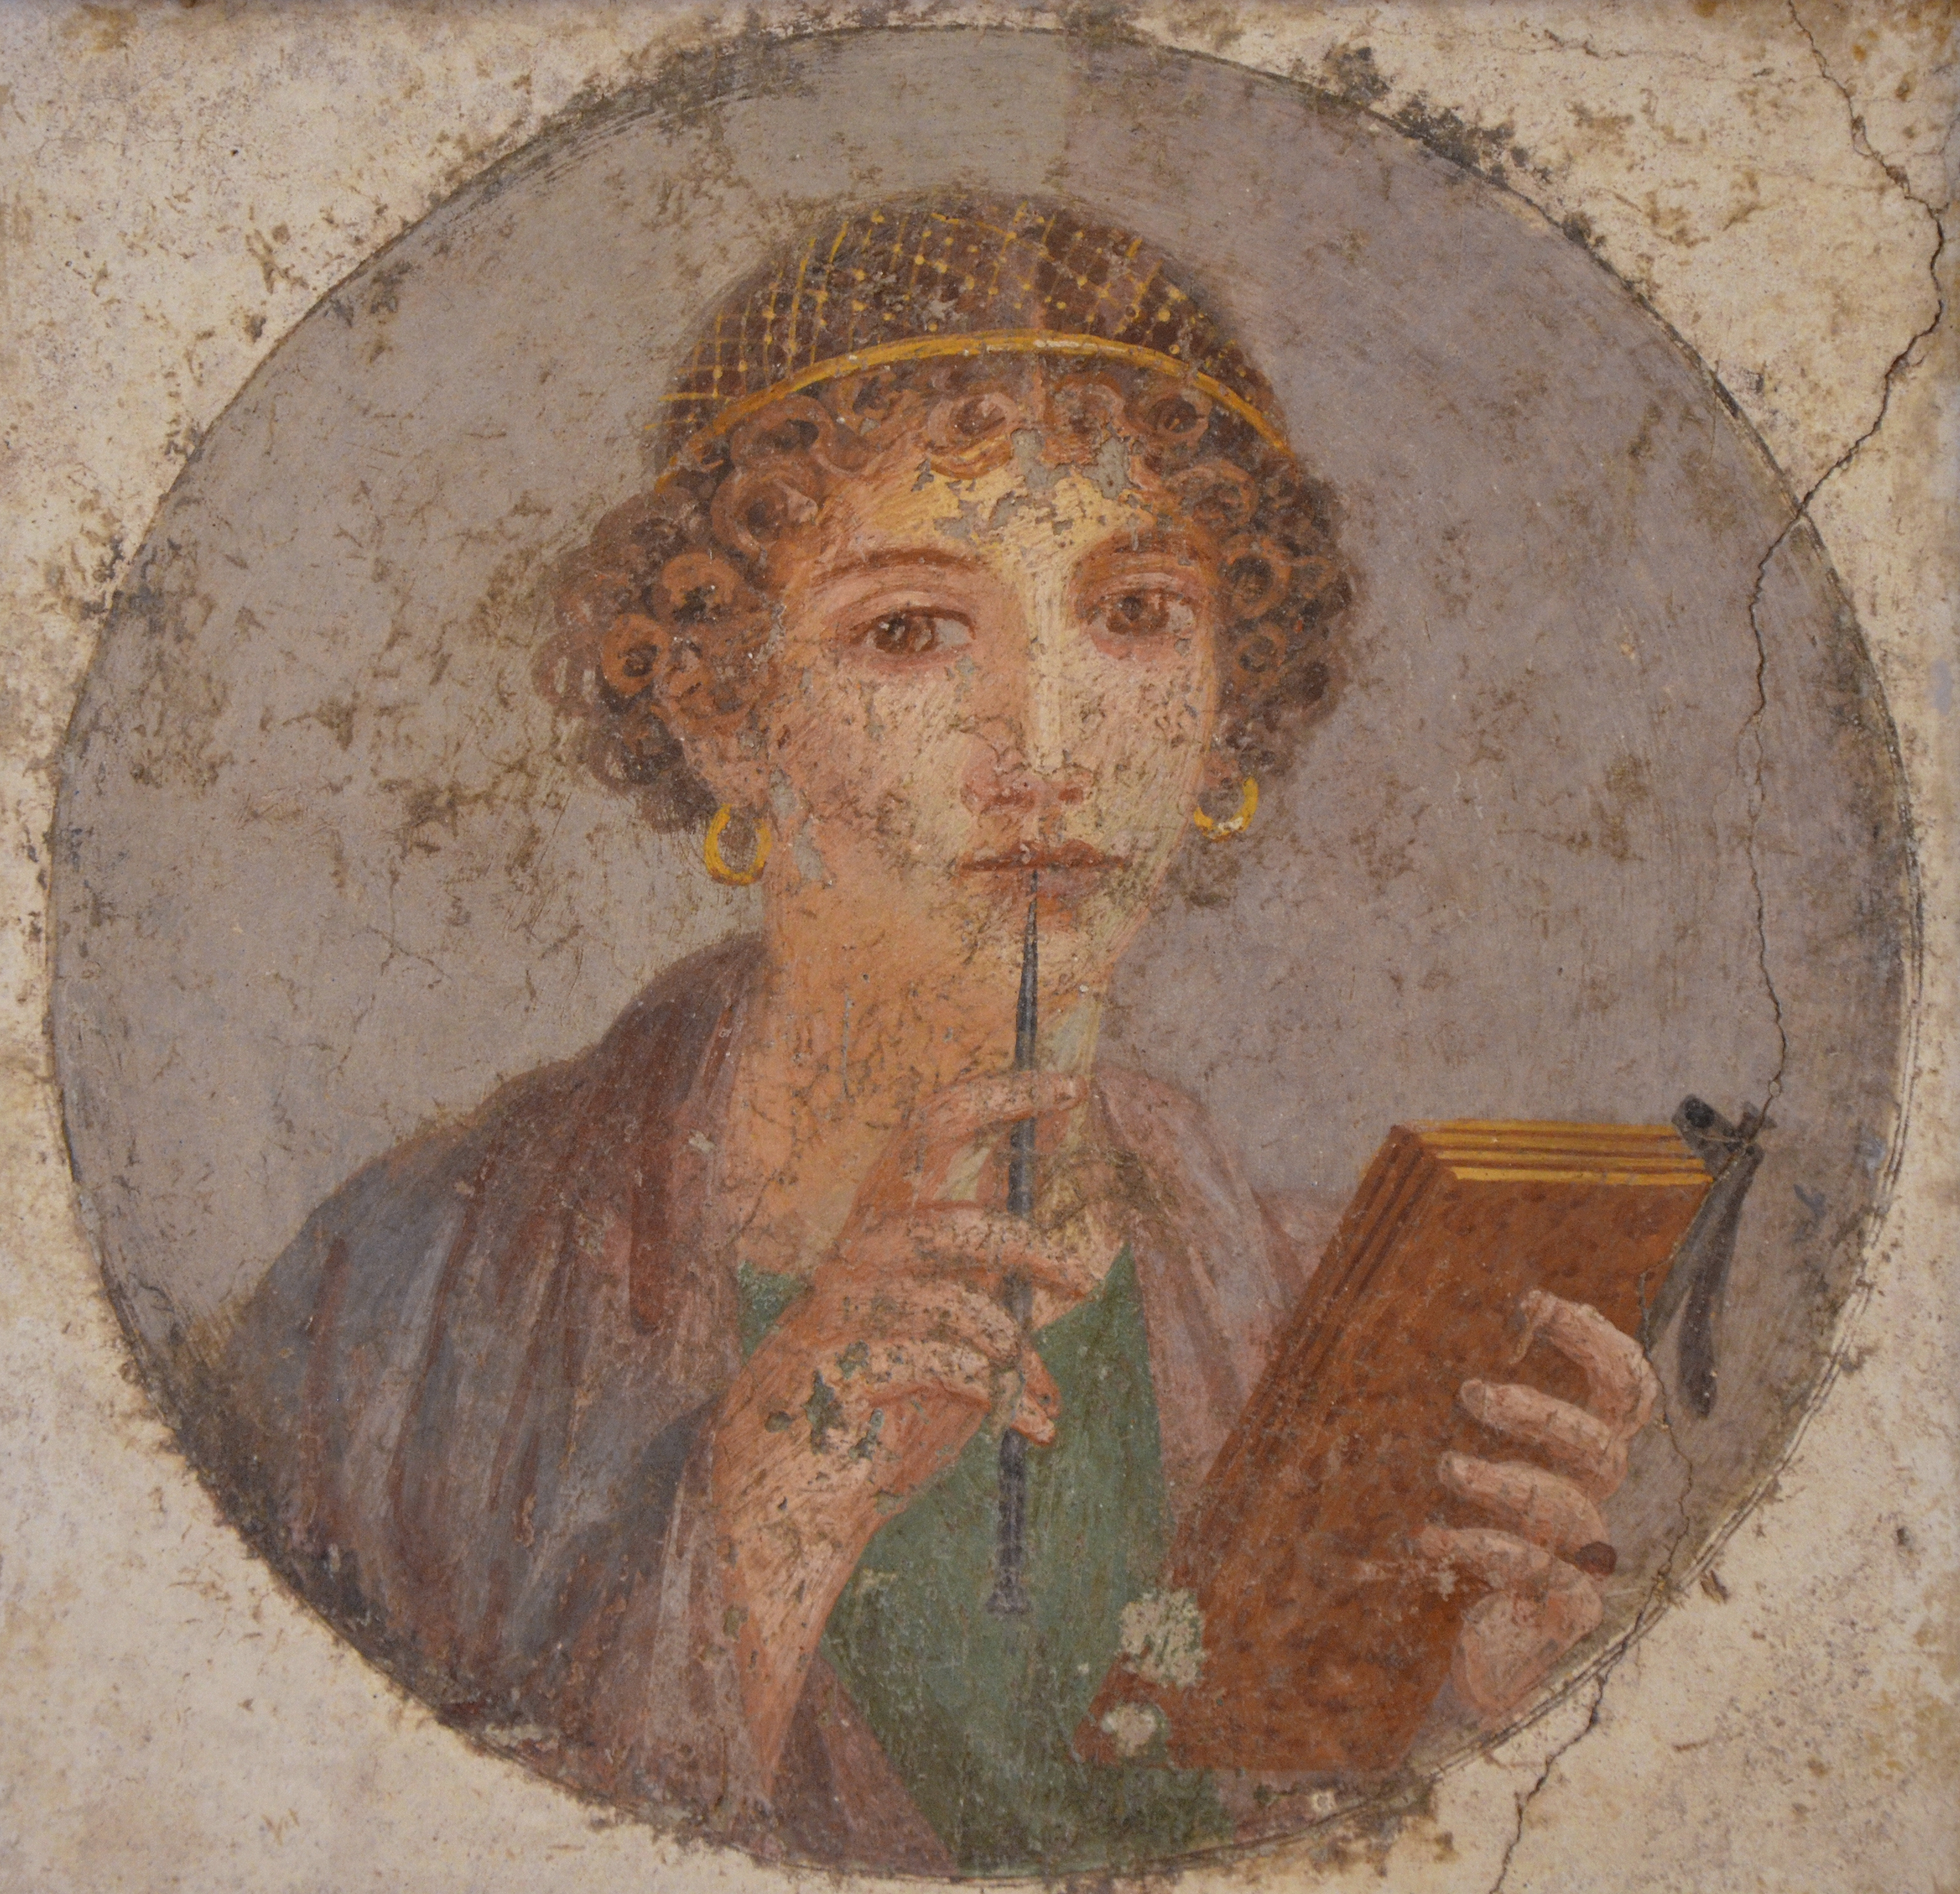 Fresco showing a woman so-called Sappho holding writing implements, from Pompeii, Naples National Archaeological Museum